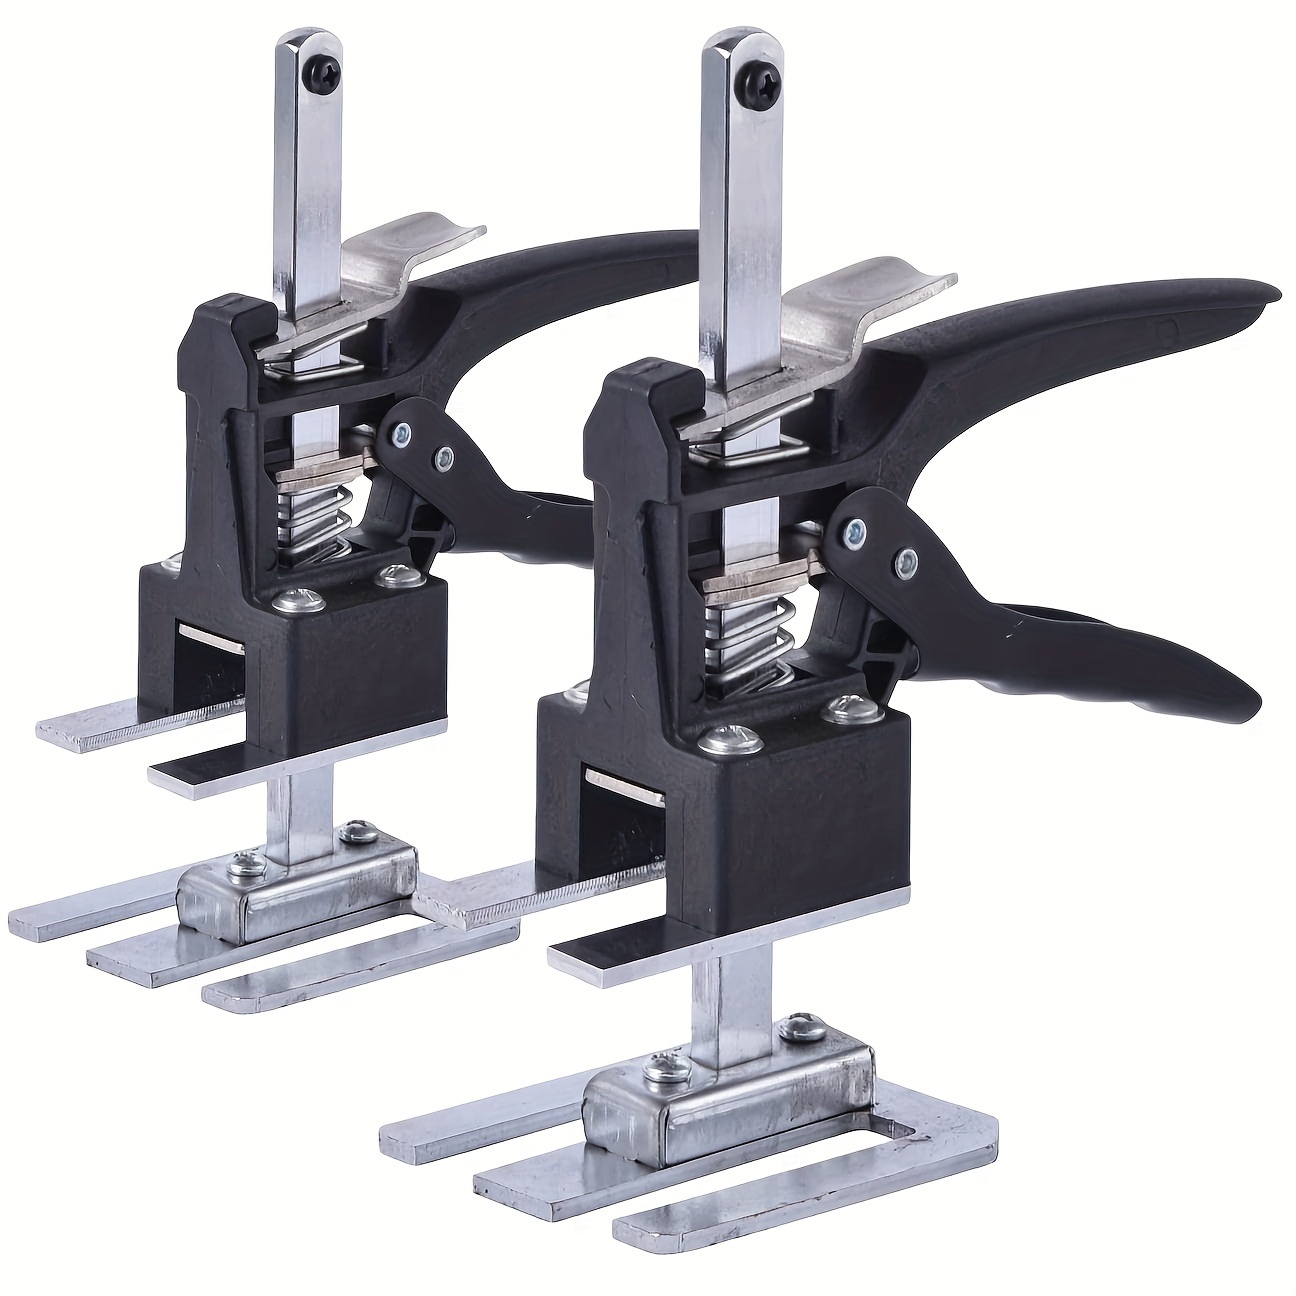  Labor Saving Arm Jack 2PCS,Multifunctional Hand Lifting Jack  Tool,Lever Arm Lifter, Installing Cabinet Jack and Door Board Lifter,Wall  Tile Locator and Furniture Lifter for Heavy Furniture. : Tools & Home  Improvement